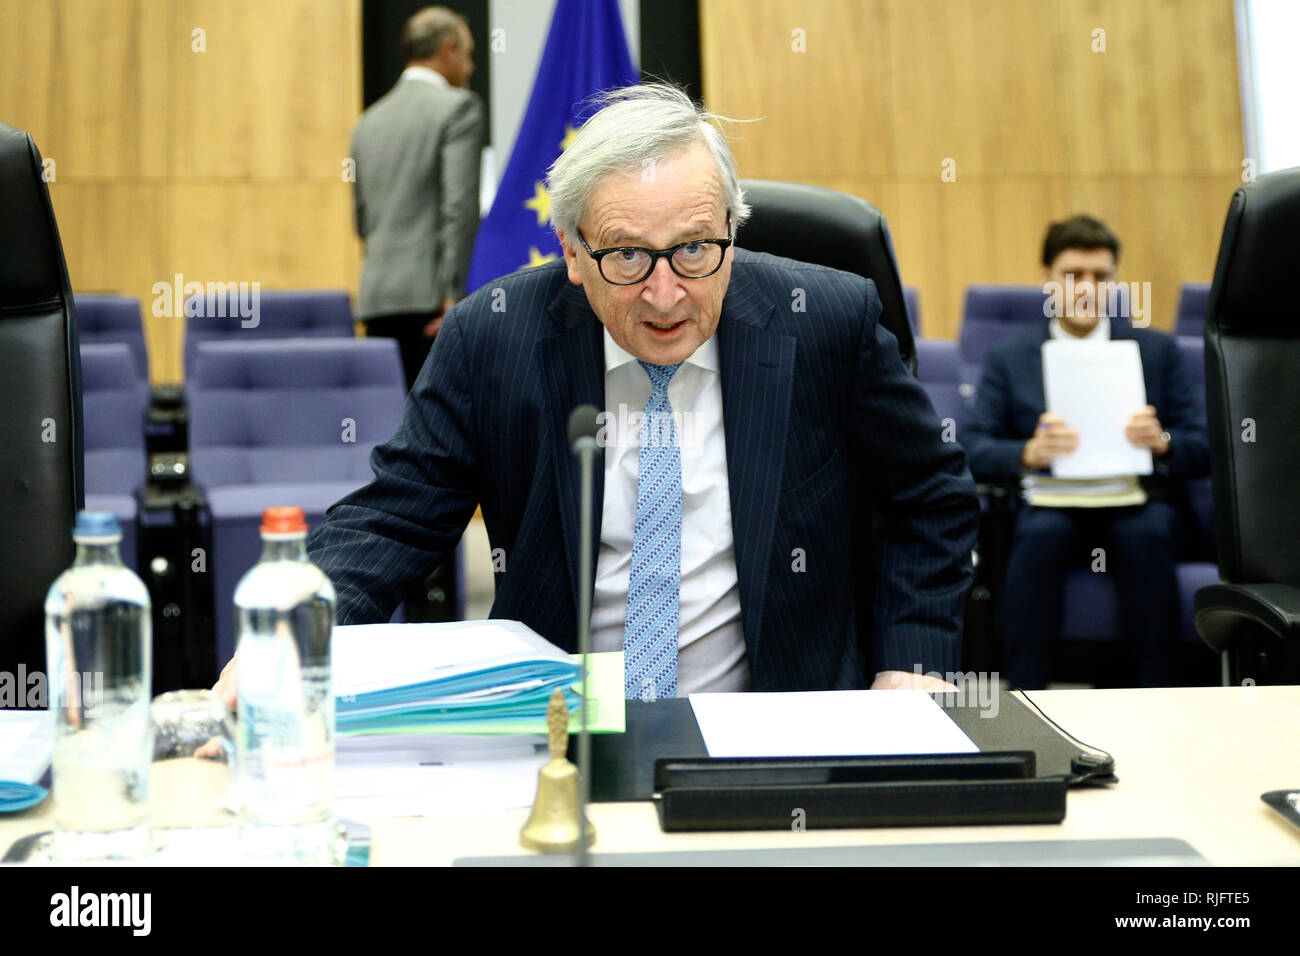 Brussels, Belgium. 6th Feb. 2019.President of the European Commission, Jean-Claude Juncker attends in a Weekly EU Commission College meeting. Alexandros Michailidis/Alamy Live News Stock Photo